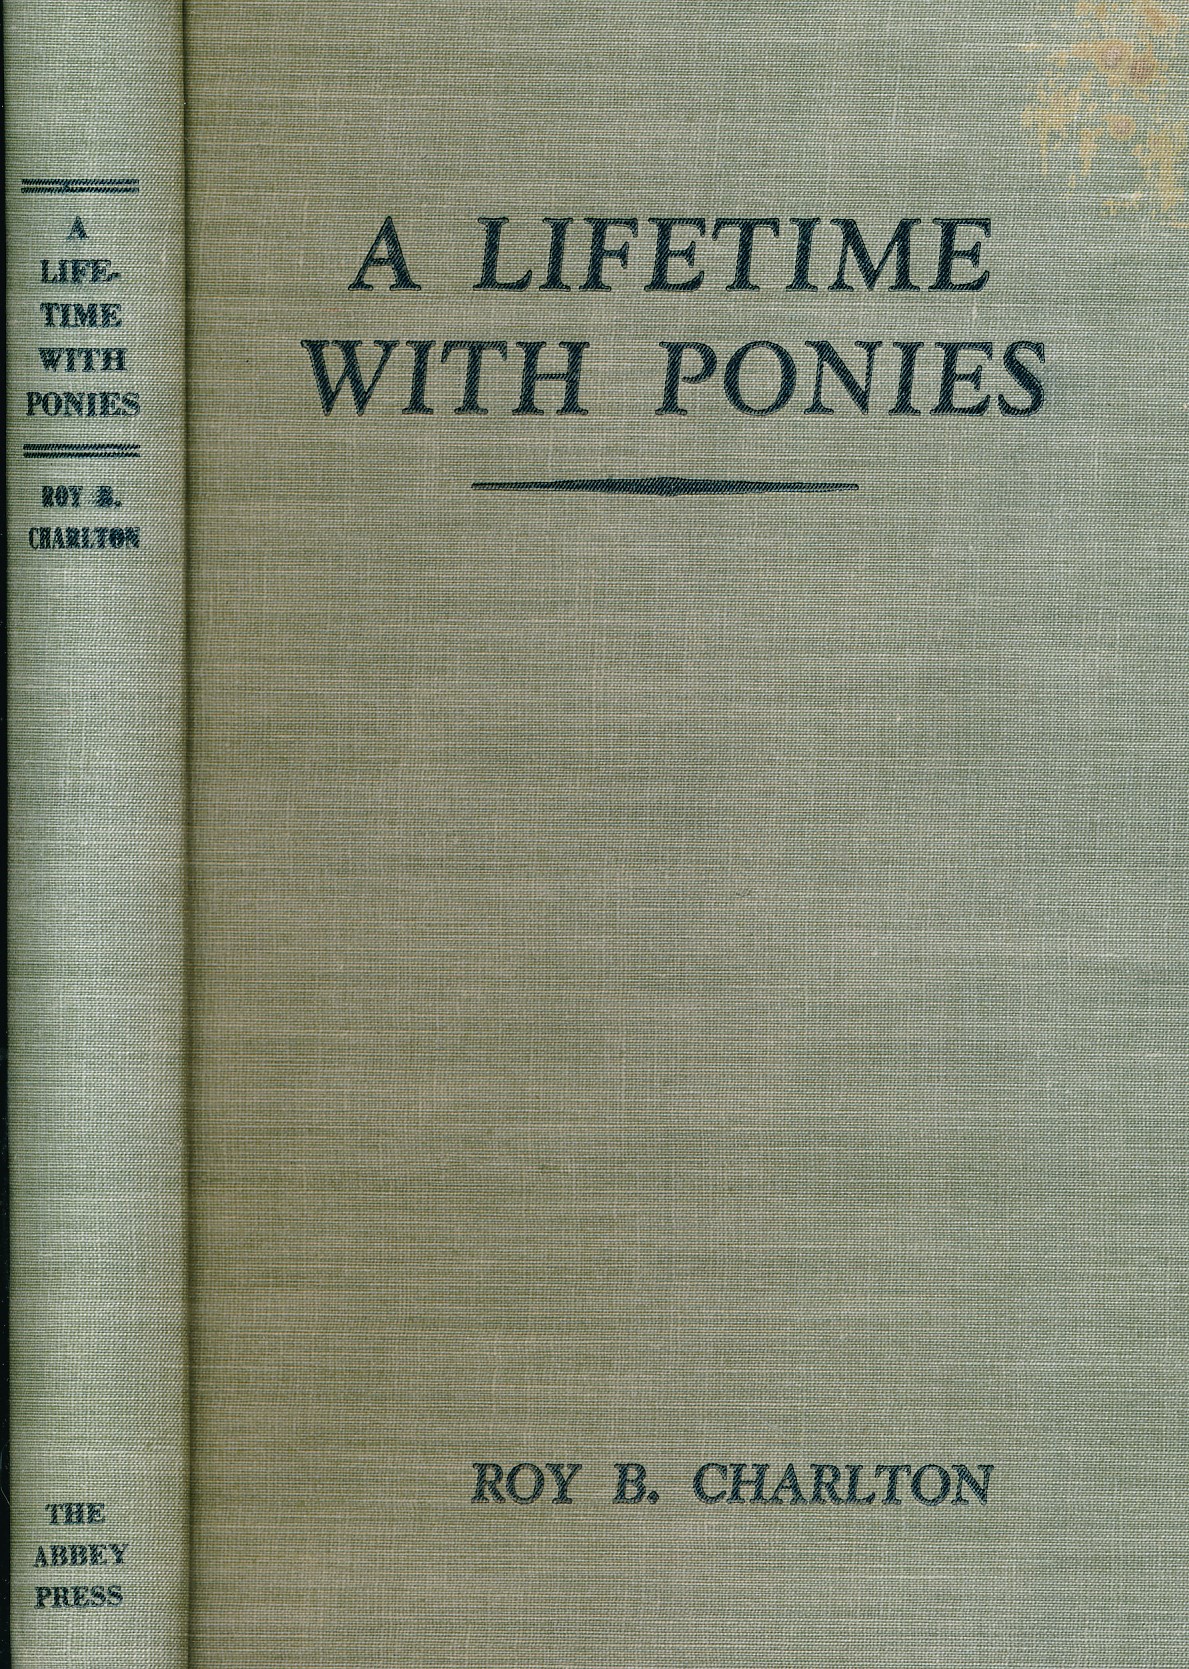 A Lifetime with Ponies